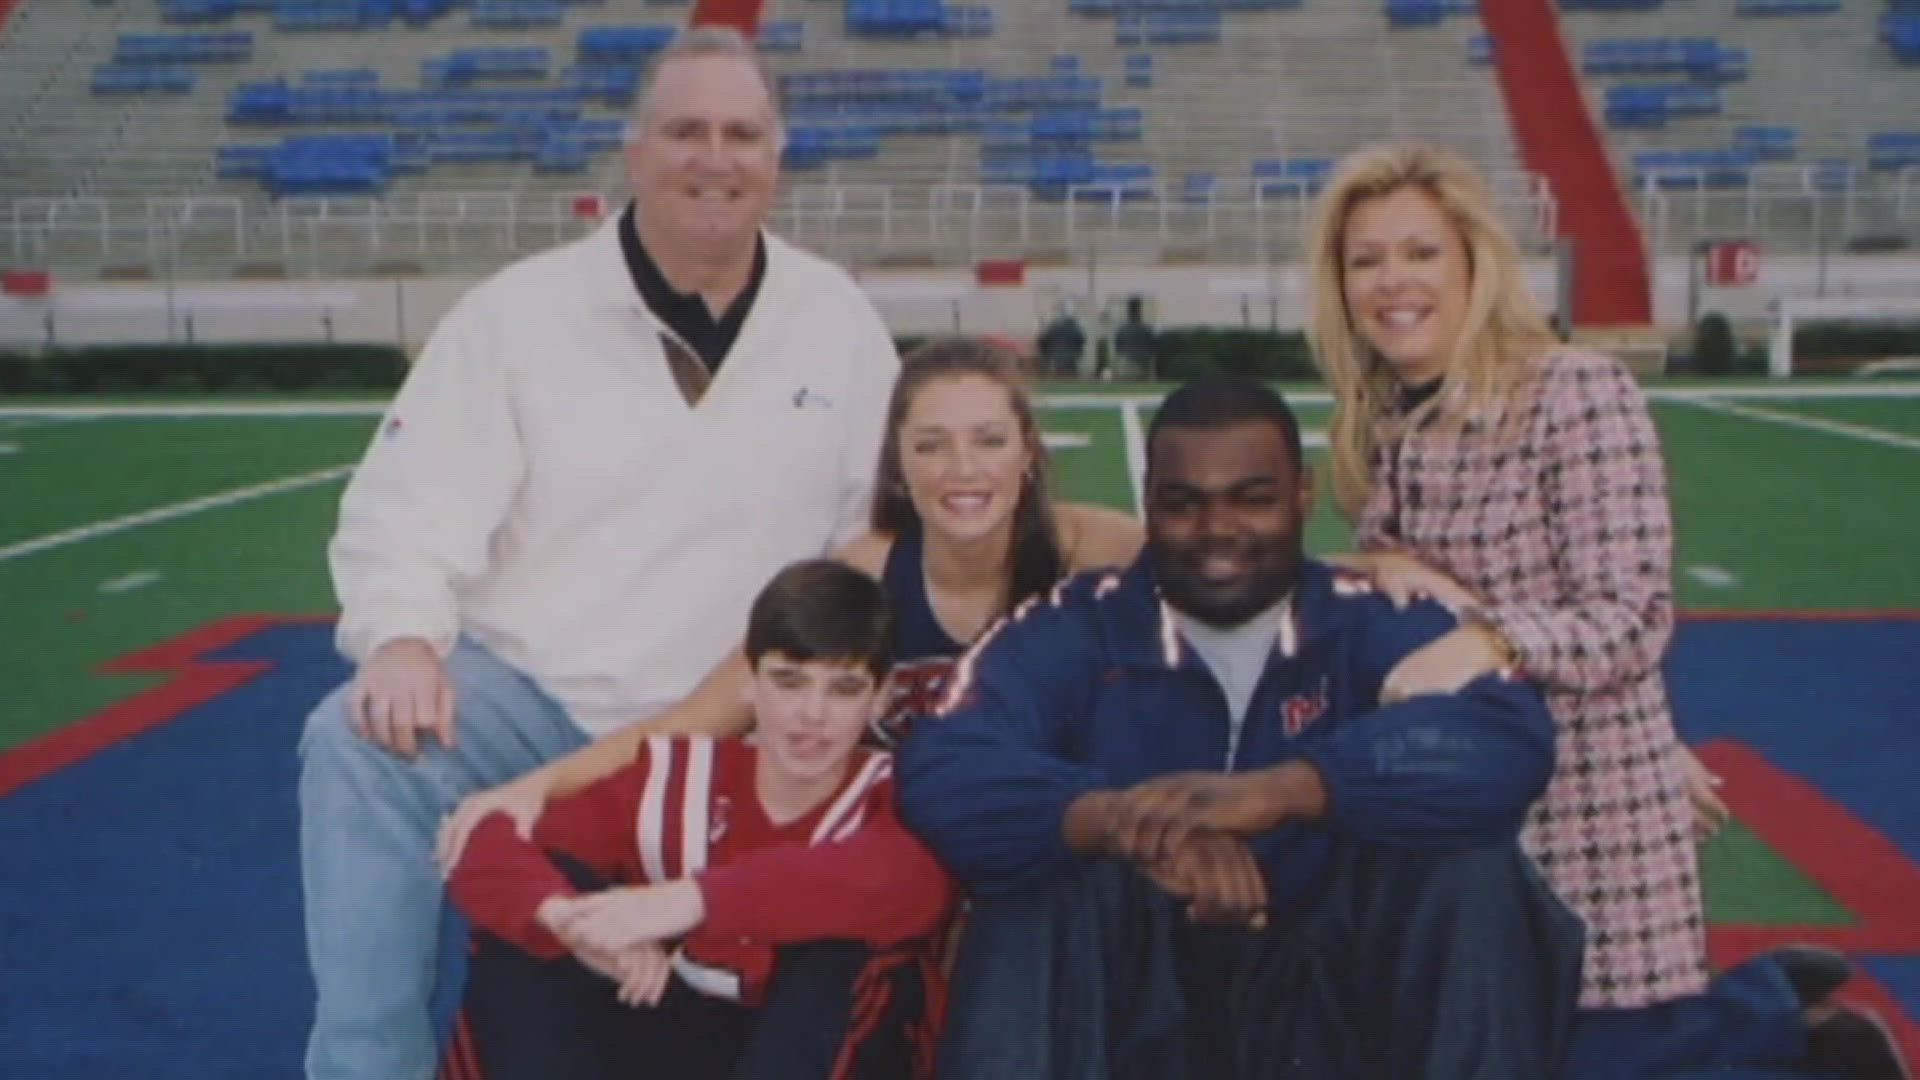 Michael Oher, known for being the inspiration for “The Blind Side,” claimed the couple he thought adopted him actually remain his conservators.